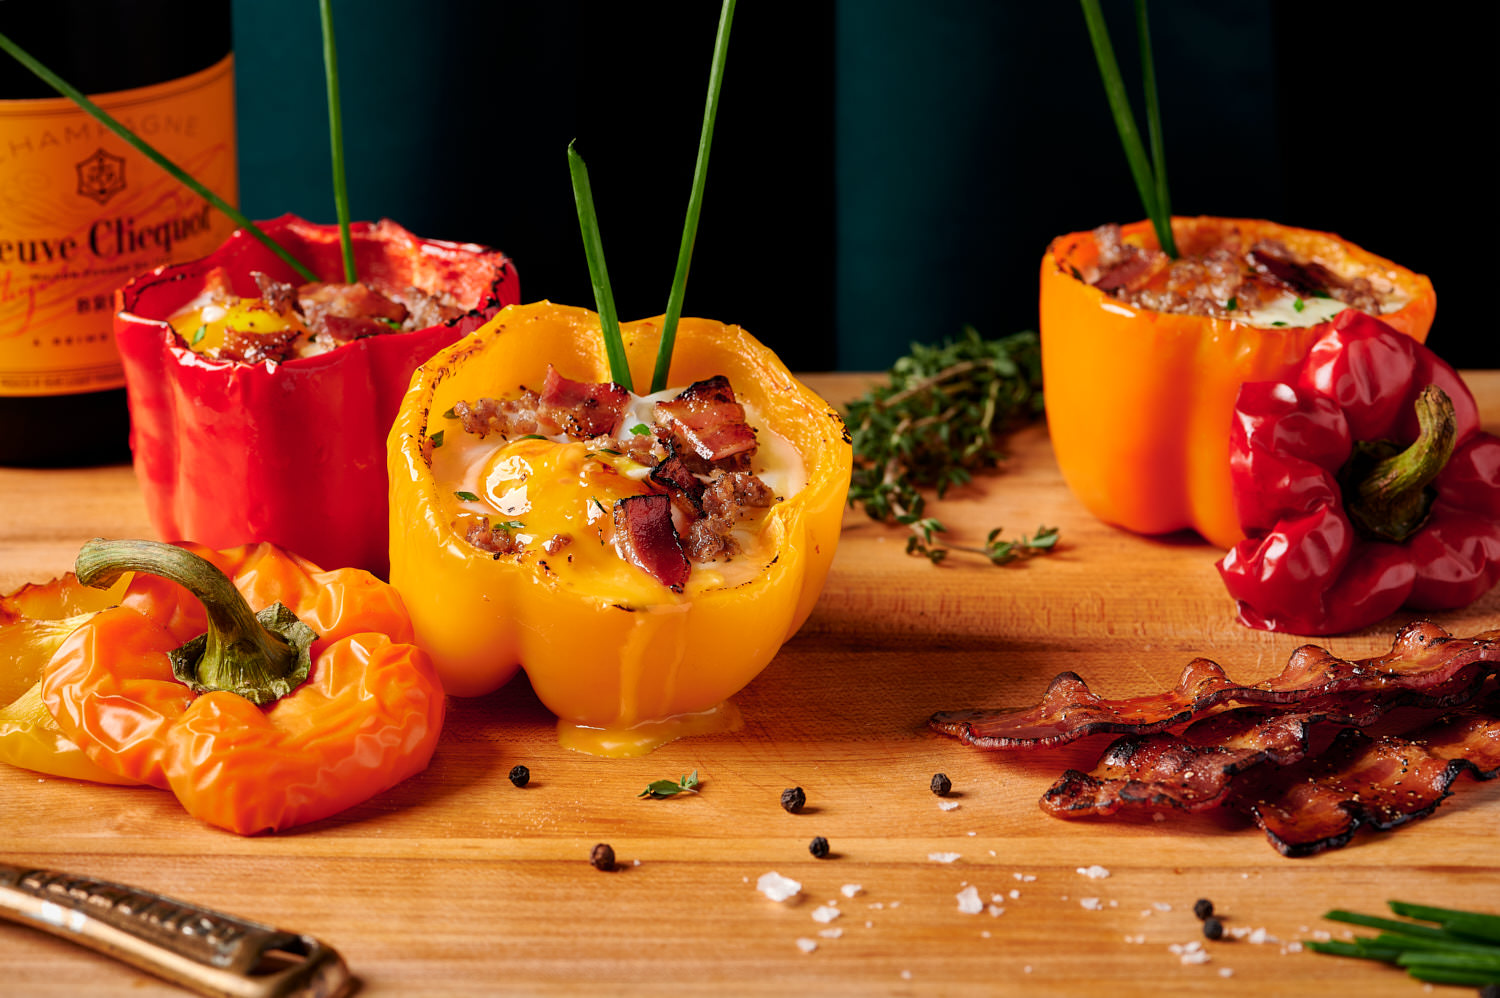 Editorial Cookbook Food Photography of Style Eggs in Bell Peppers